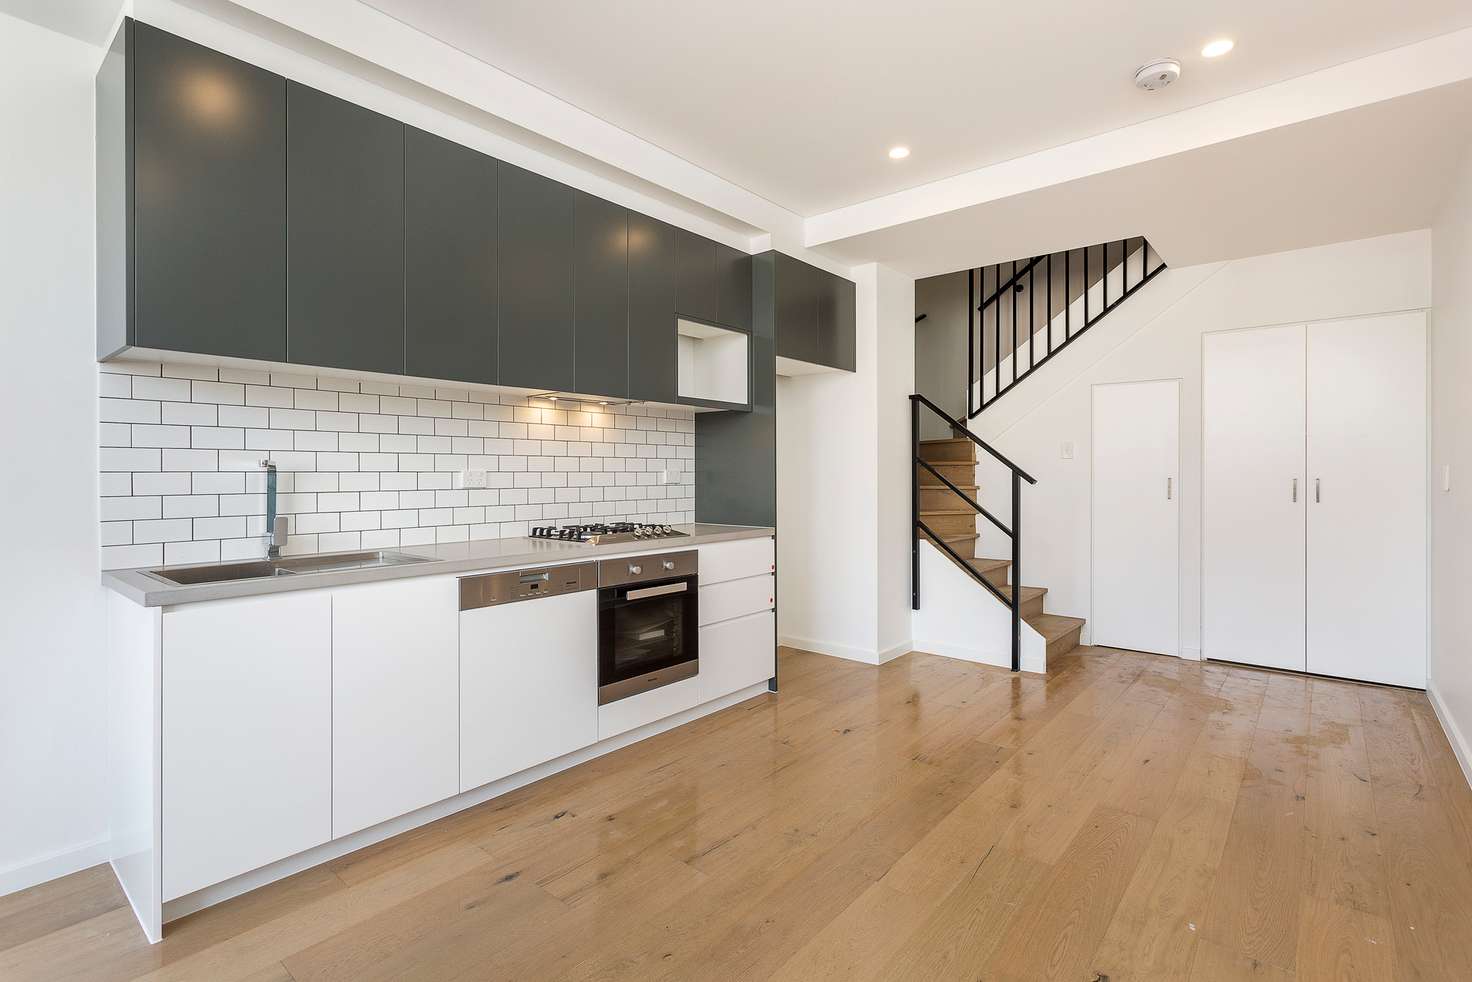 Main view of Homely apartment listing, 3.04/481-483 Elizabeth Street, Surry Hills NSW 2010